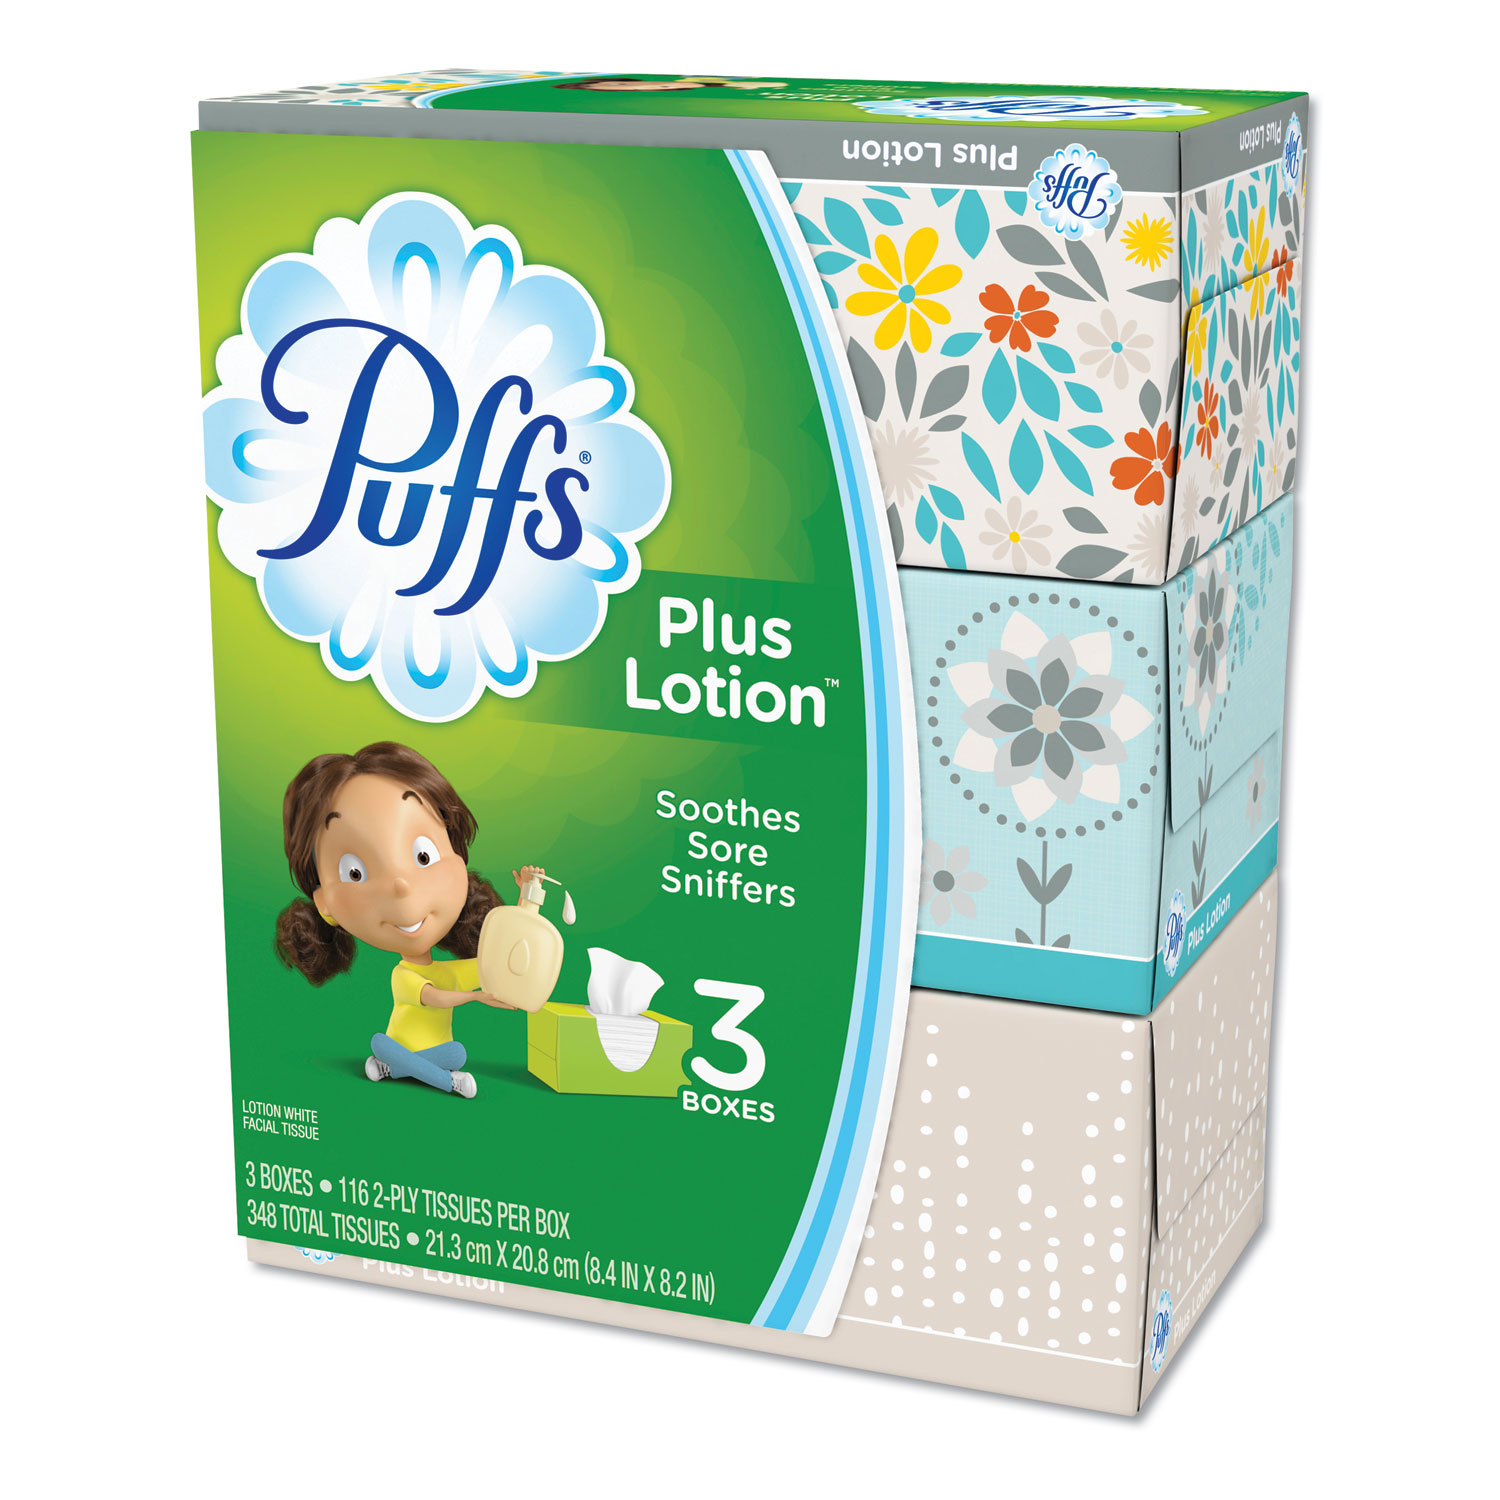  Puffs 82086 Plus Lotion Facial Tissue, White, 2-Ply, 116 Sheets/Box, 3 Boxes/Pack (PGC82086) 